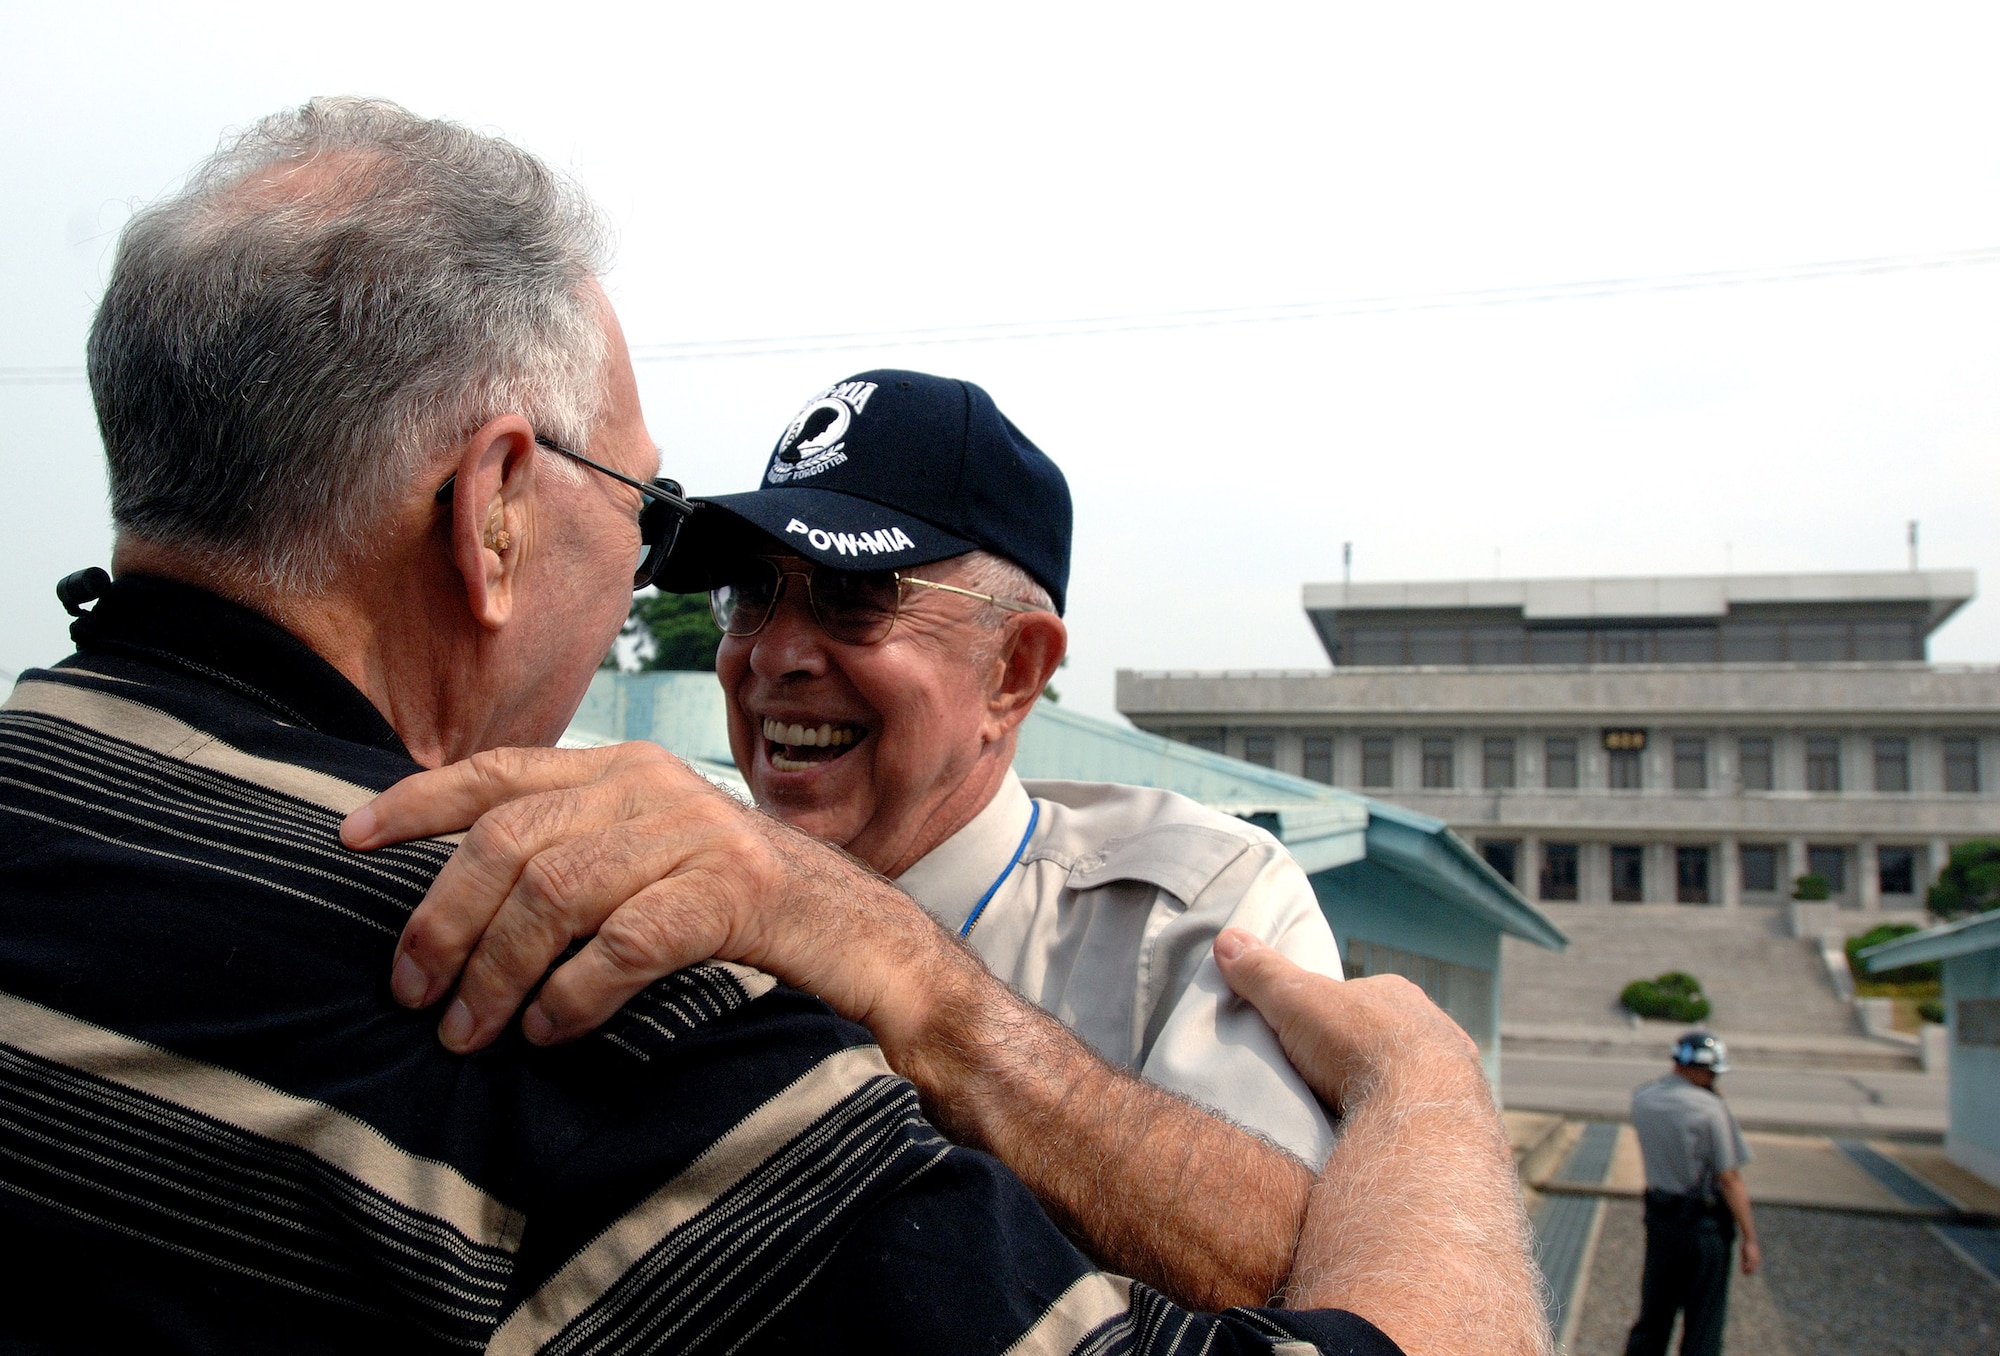 Donald Krueger (left) hugs retired Lt. Col. Harold Fischer after meeting by chance during a visit to the Korean Demilitarized Zone during a Sept. 13 tour held to honor Korean War veterans in Panmunjeom, South Korea. Colonel Fischer is a double ace fighter pilot from the war. Mr. Krueger was an enlisted munitions specialist during the Korean War. The two had not seen each other in 55 years.  Air Force Korean War veterans were visiting South Korea during a weeklong tour in observance of the Air Force's 60th Anniversary. (U.S. Air Force photo/Staff Sgt. Bennie J. Davis III) 
